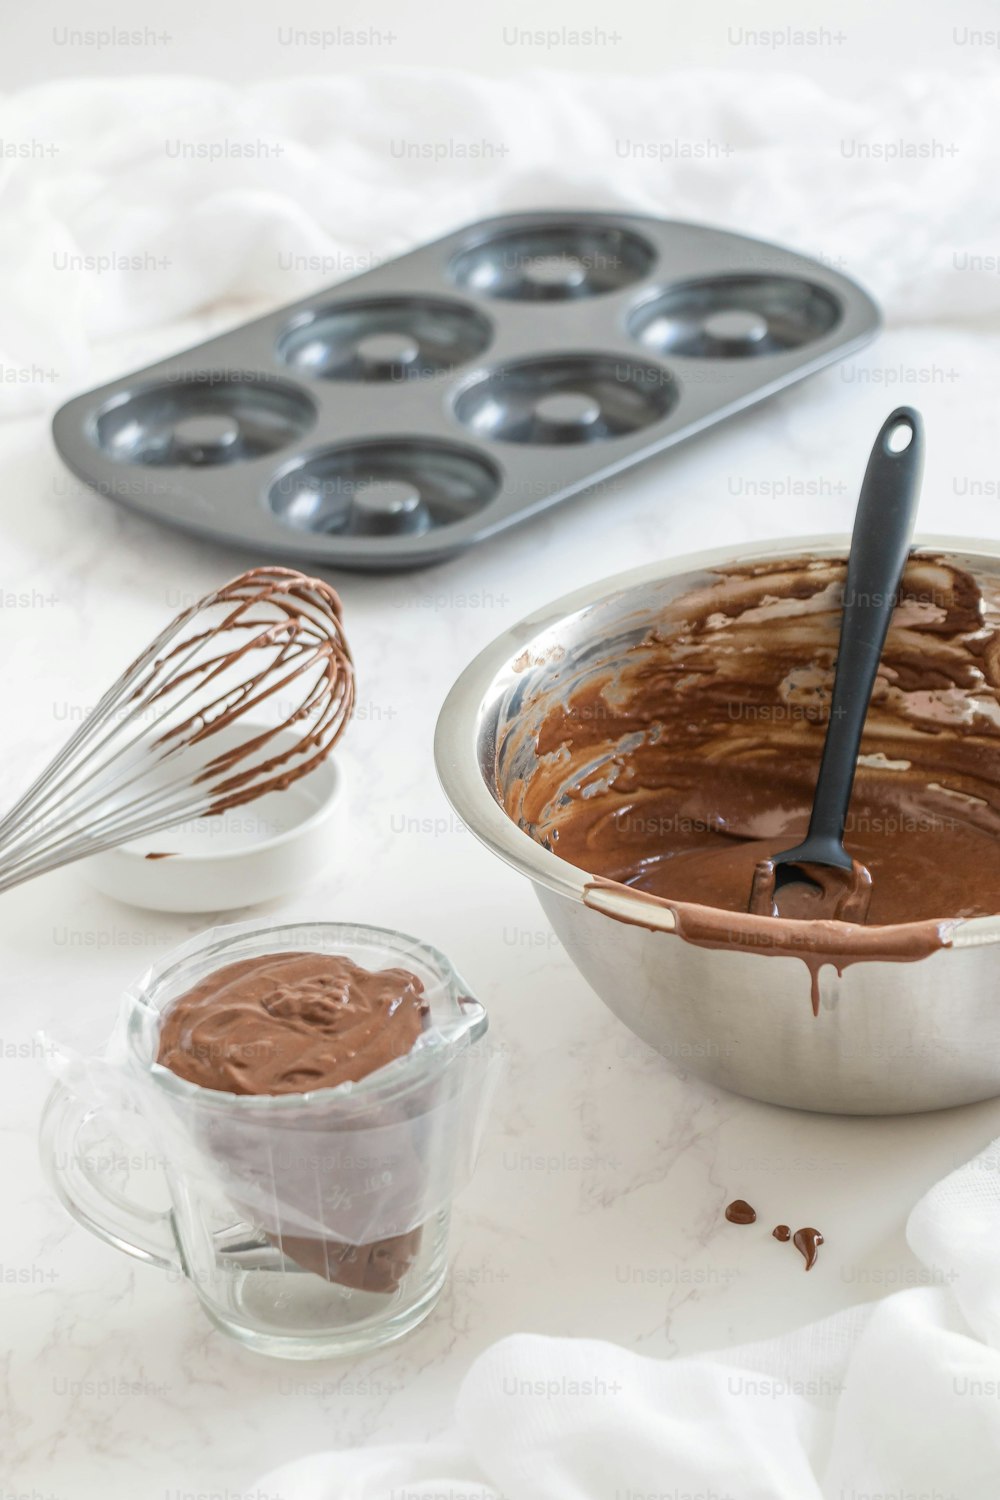 a pan filled with chocolate next to a muffin tin